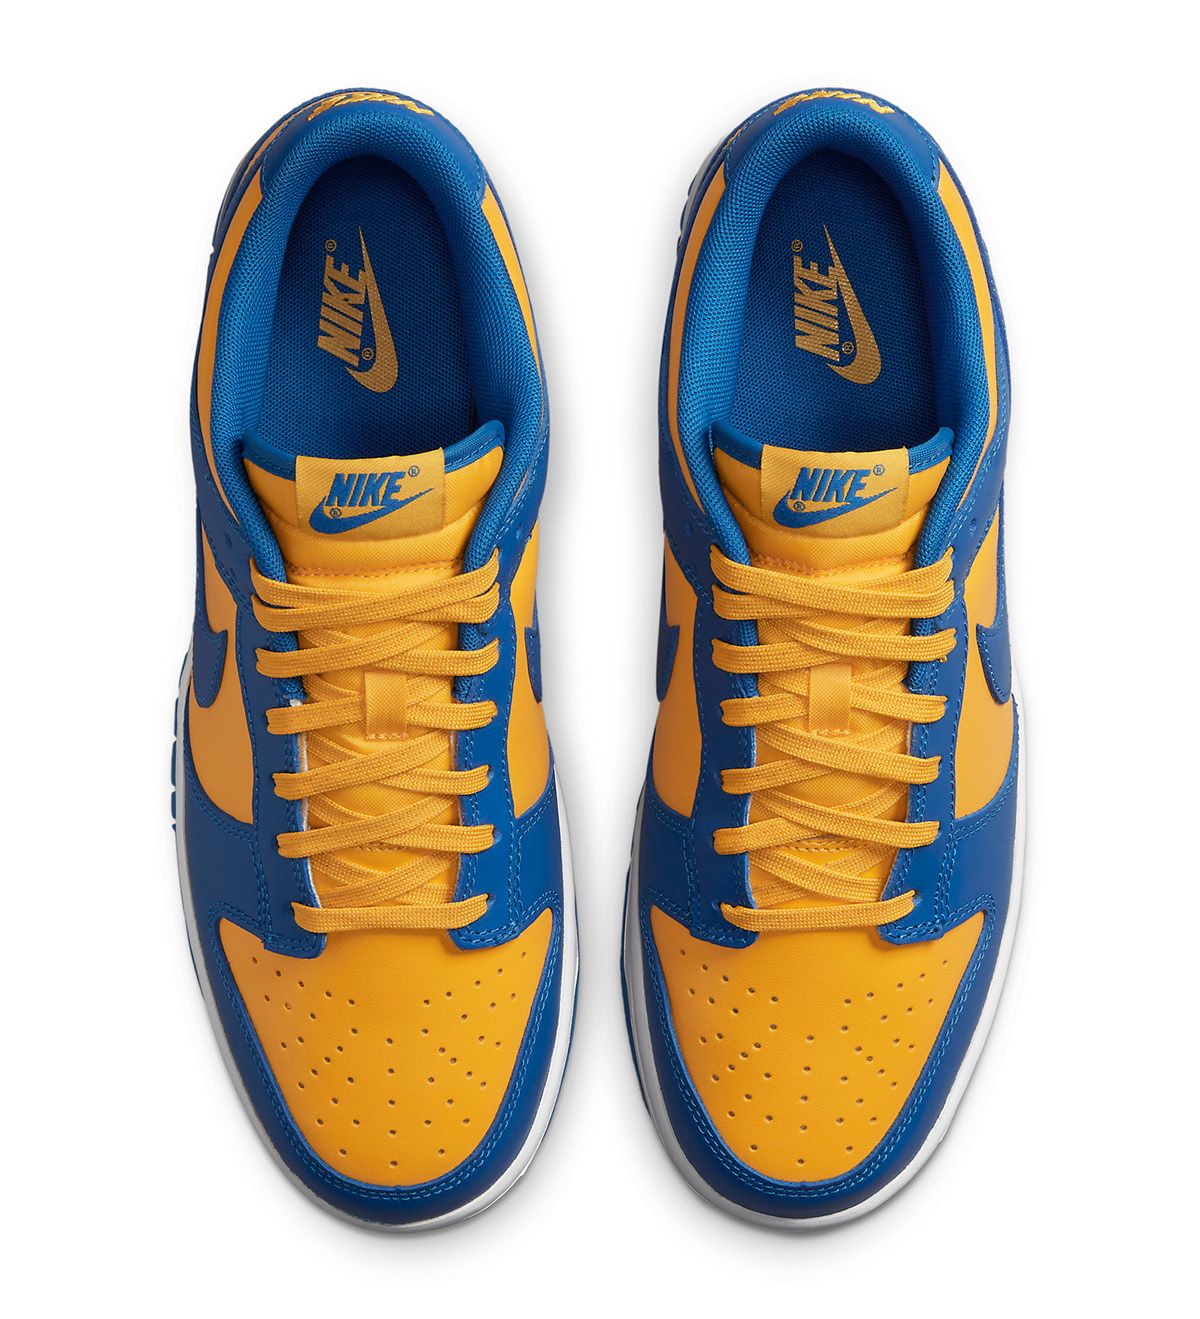 Where to Buy the Nike Dunk Low “UCLA” Restock | House of Heat°